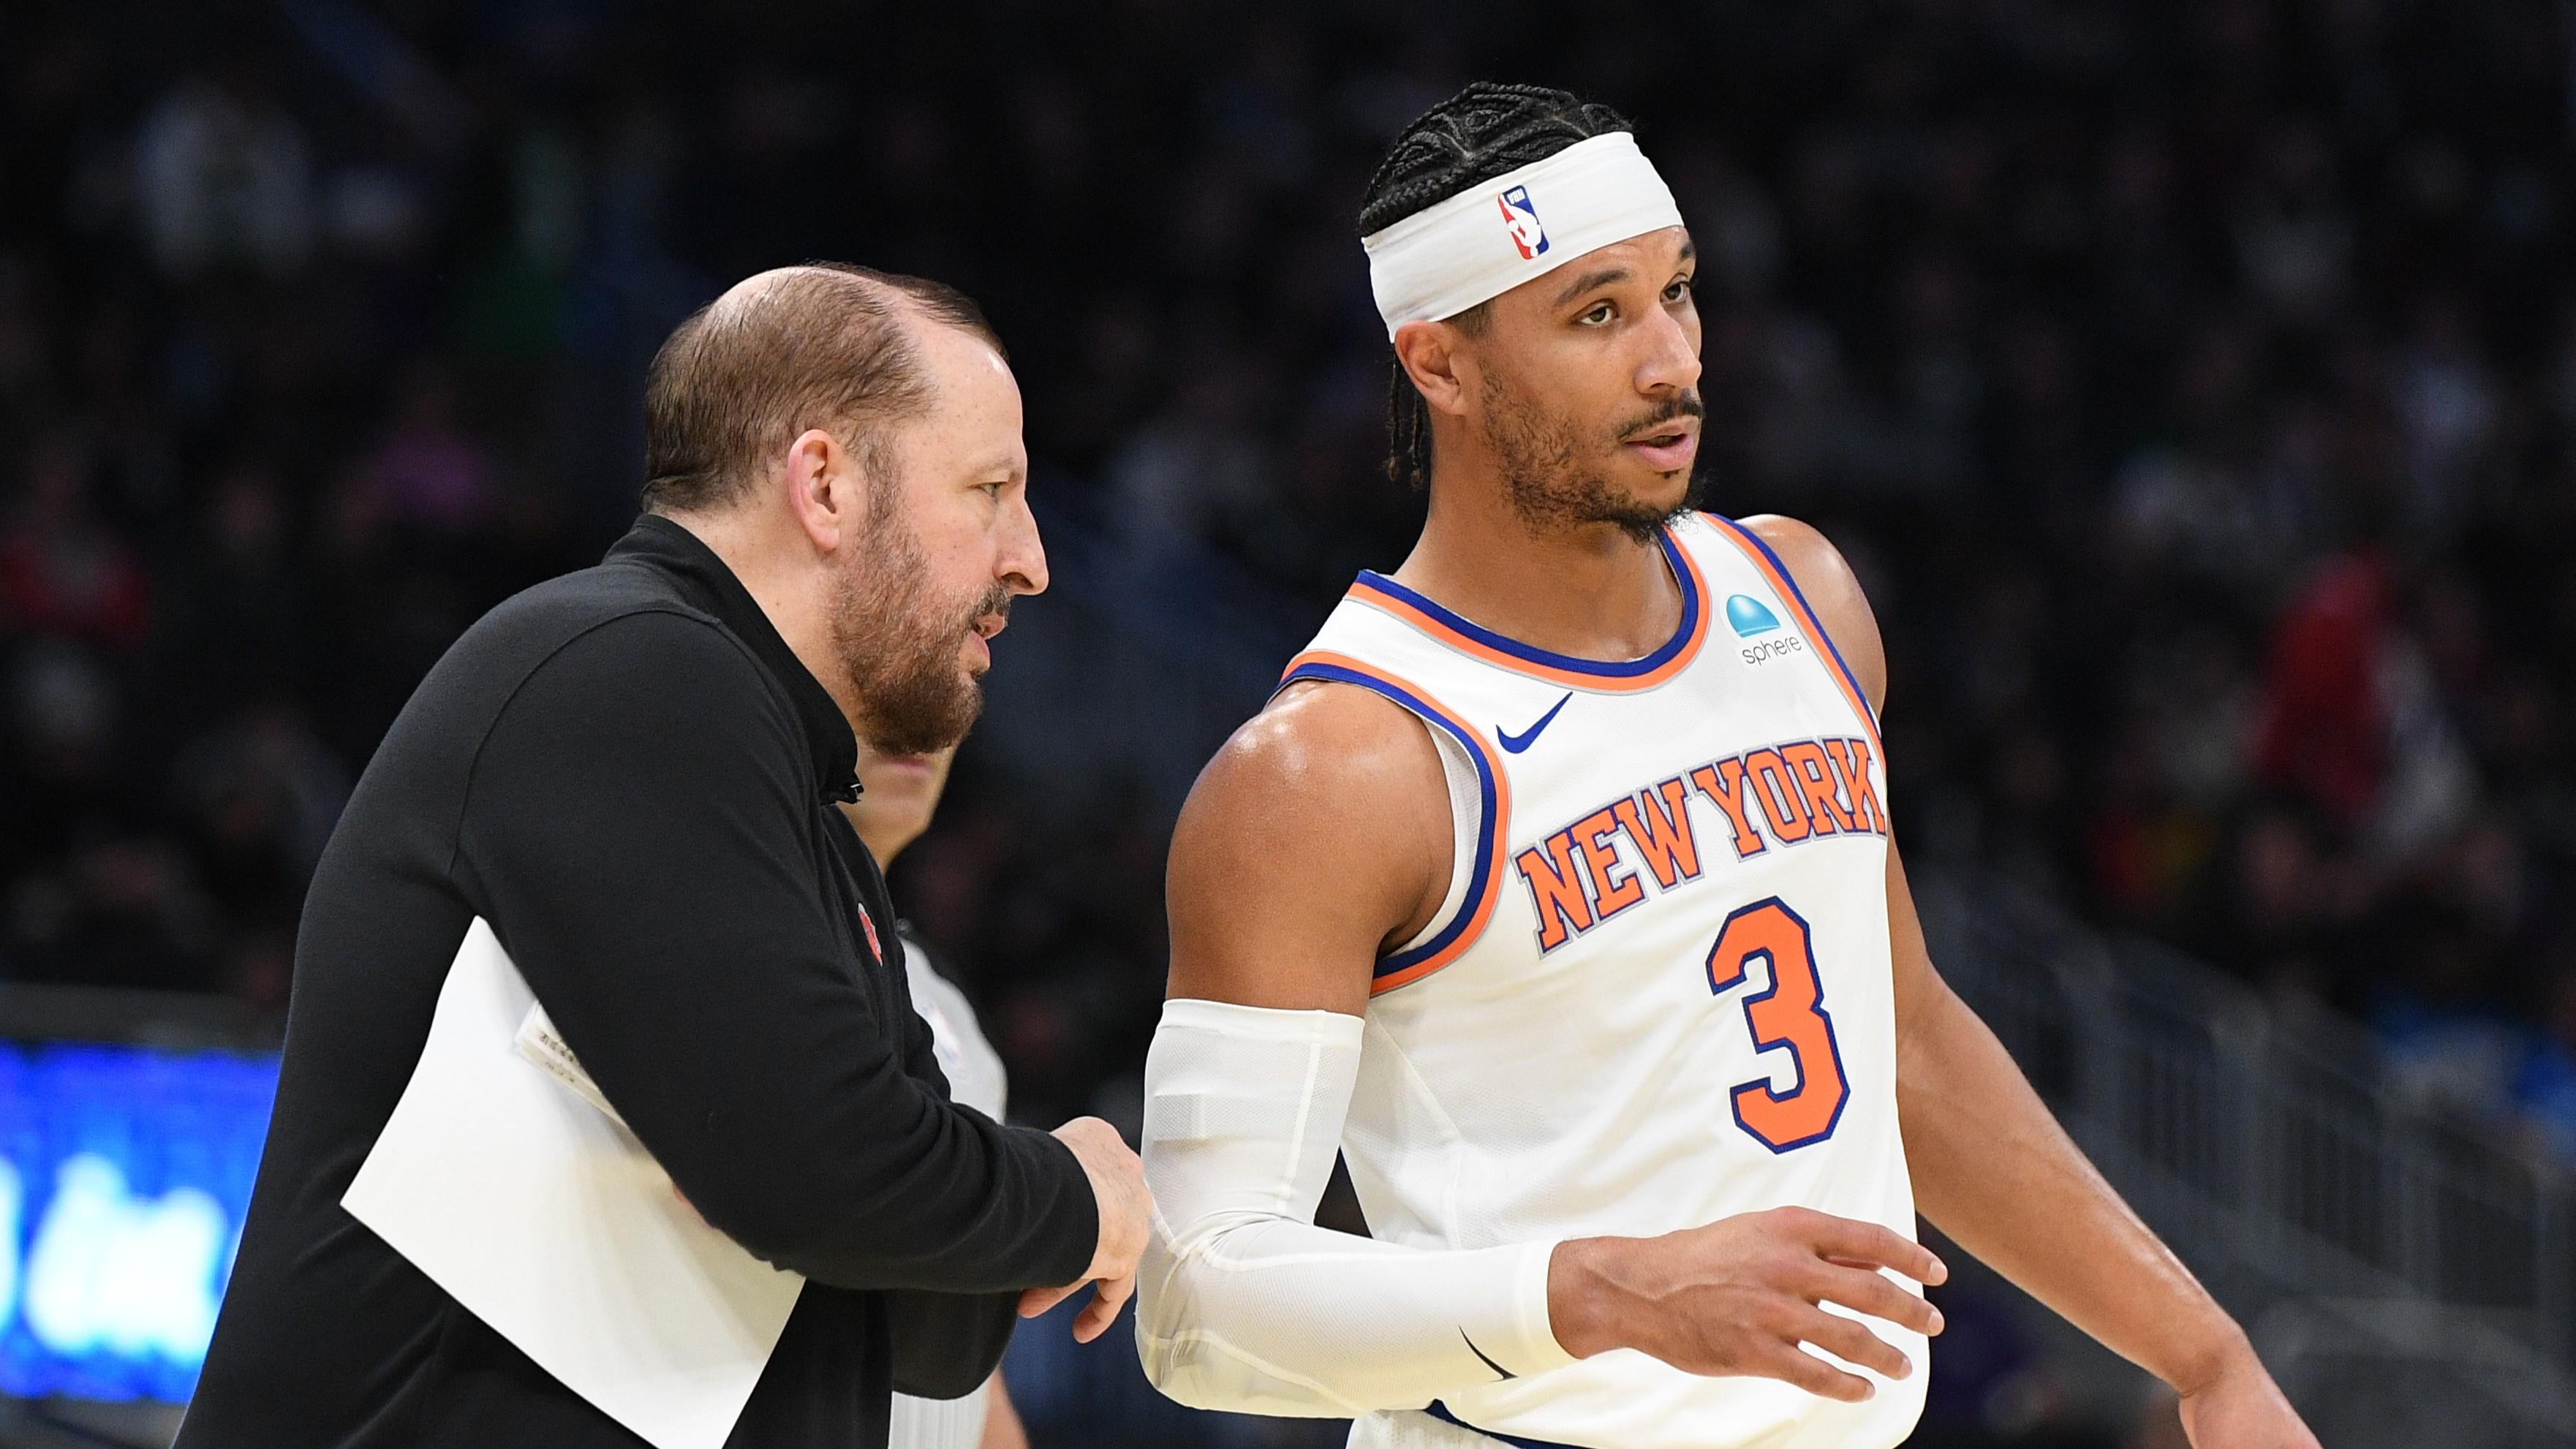 Dec 5, 2023; Milwaukee, Wisconsin, USA; New York Knicks coach Tom Thibodeau talks with New York Knicks guard Josh Hart (3) on the sideline against the Milwaukee Bucks in the first half at Fiserv Forum. Mandatory Credit: Michael McLoone-USA TODAY Sports / © Michael McLoone-USA TODAY Sports